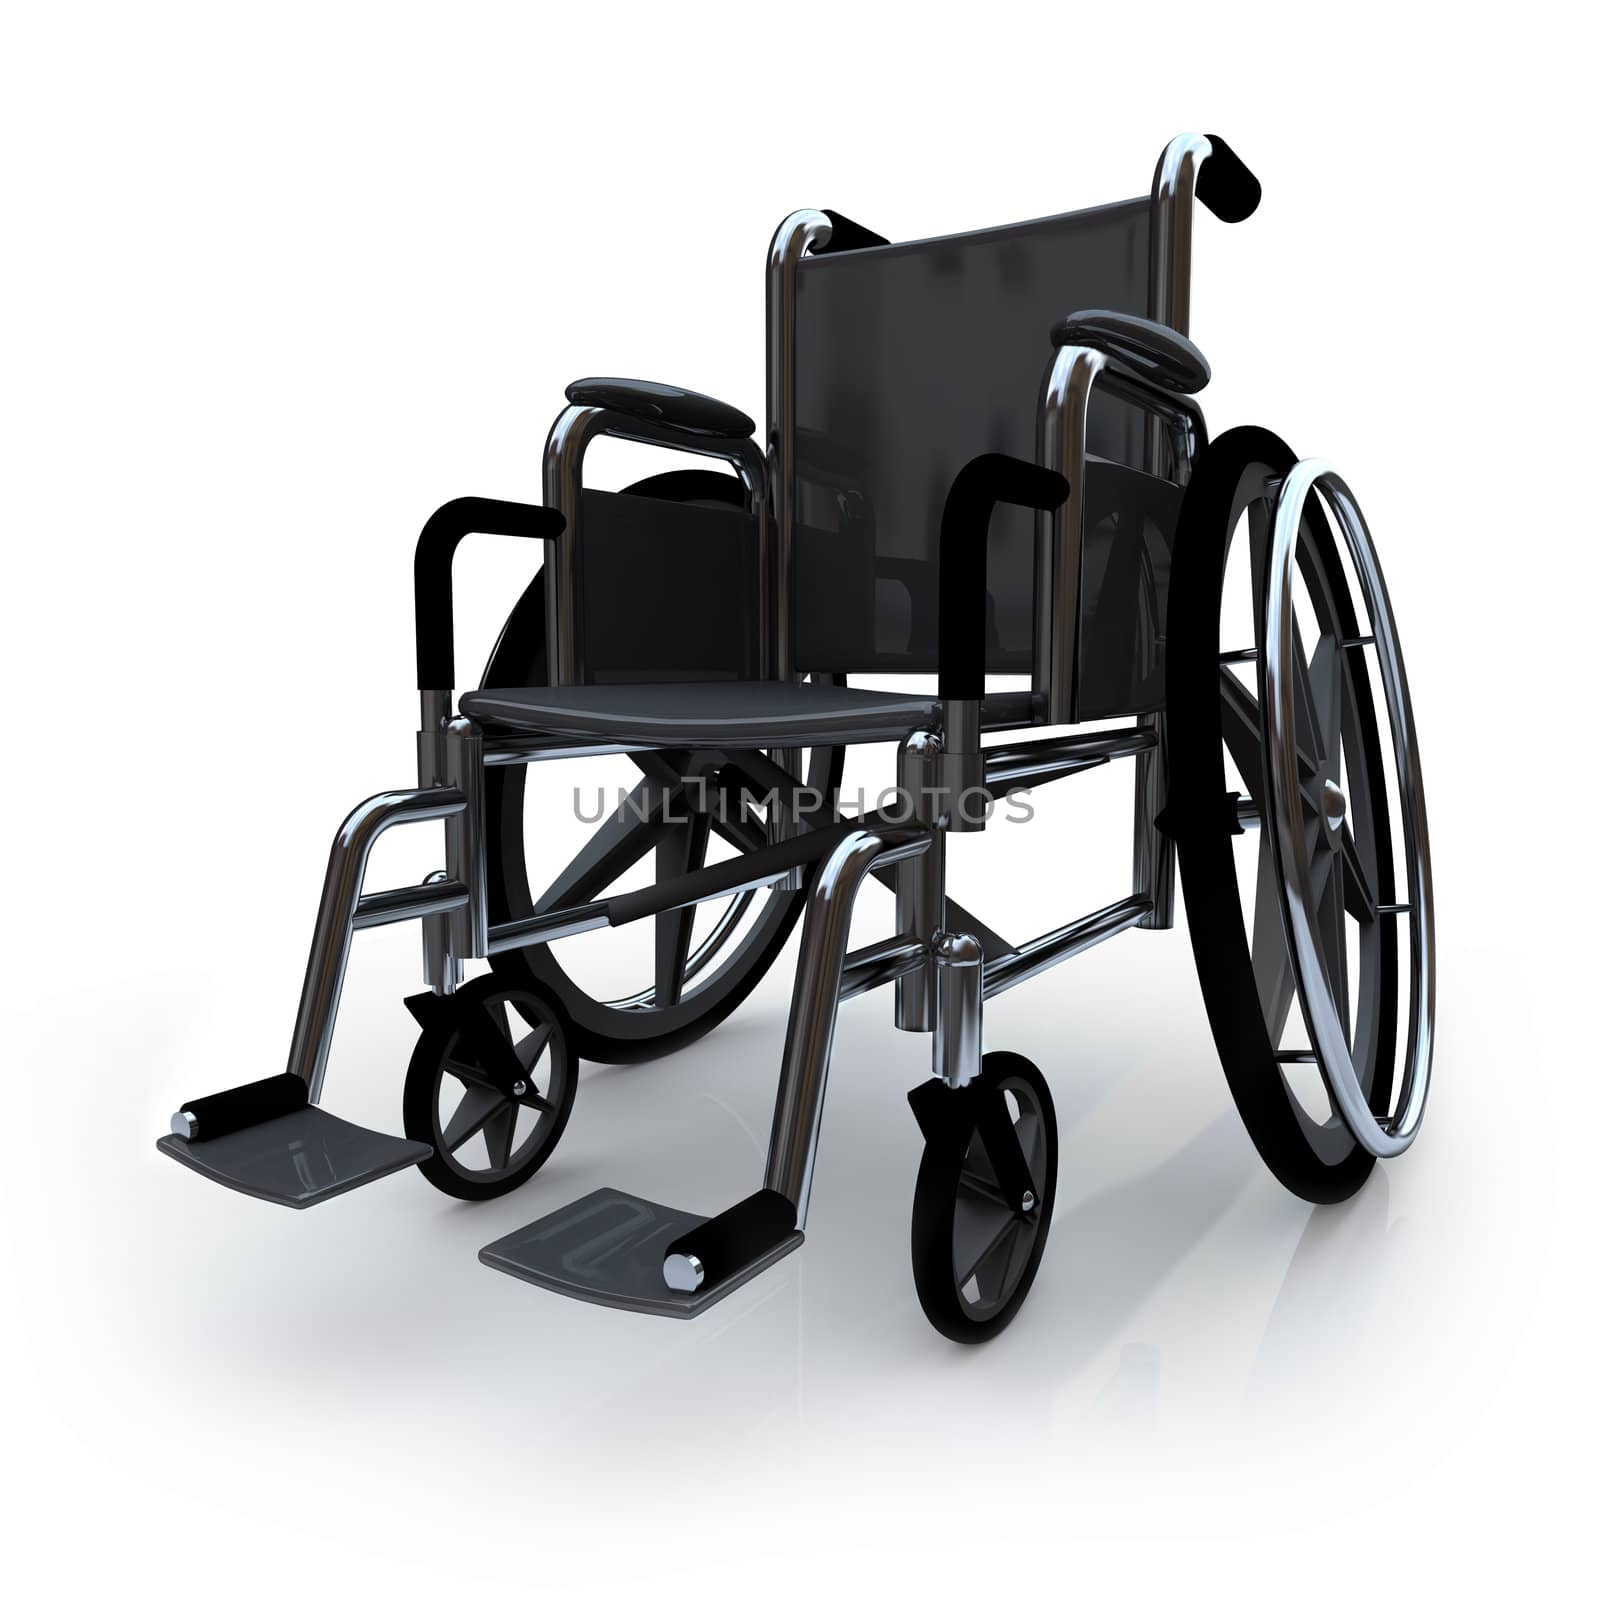 An empty wheelchair sits on a white background